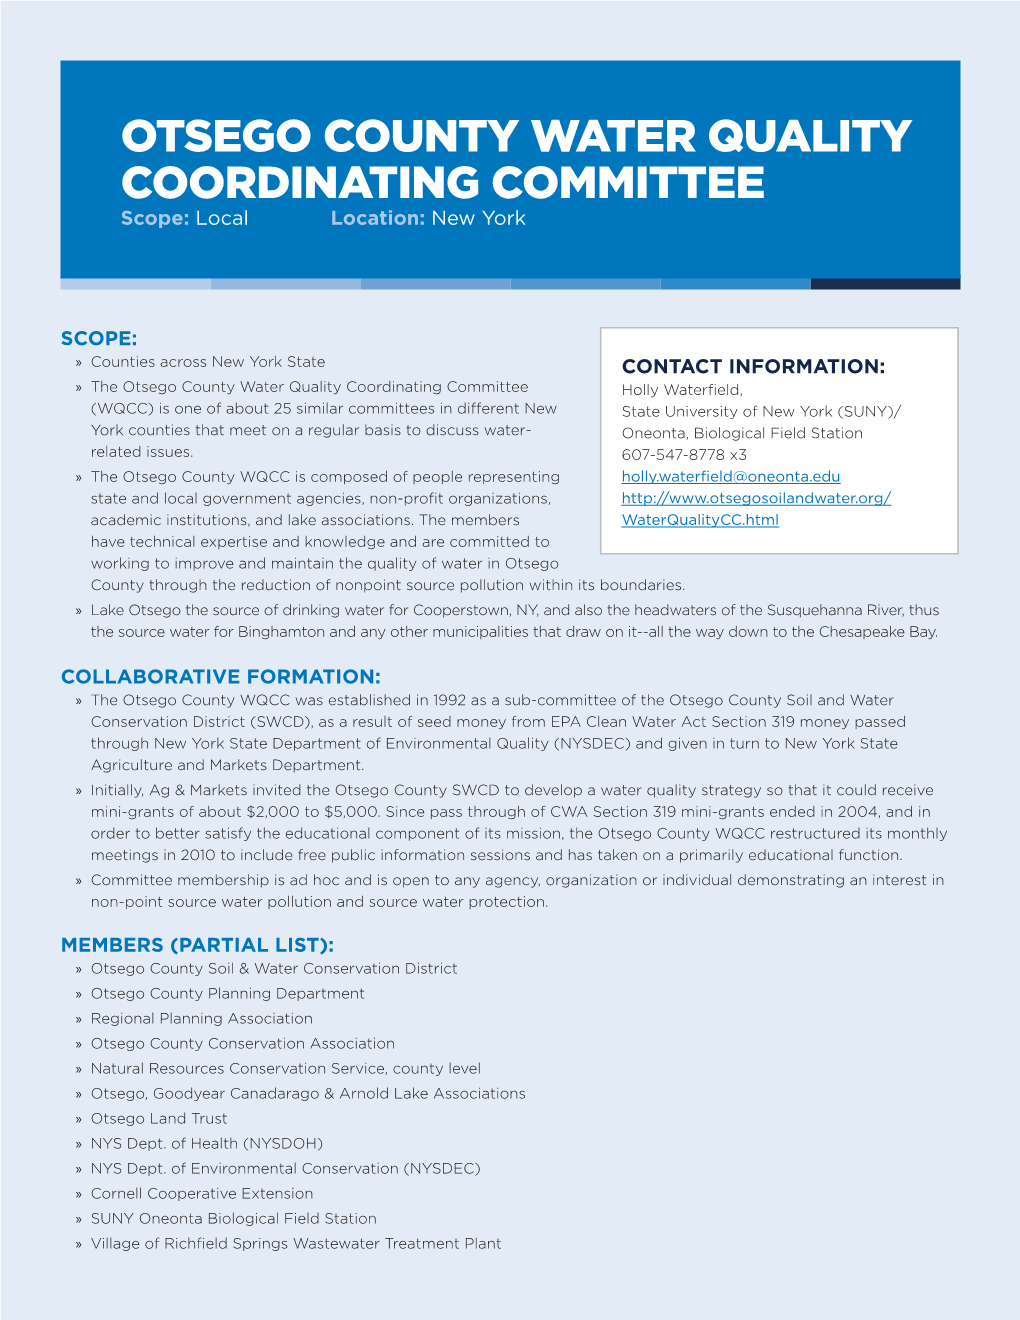 Otsego County Water Quality Coordinating Committee Scope: Local Location: New York